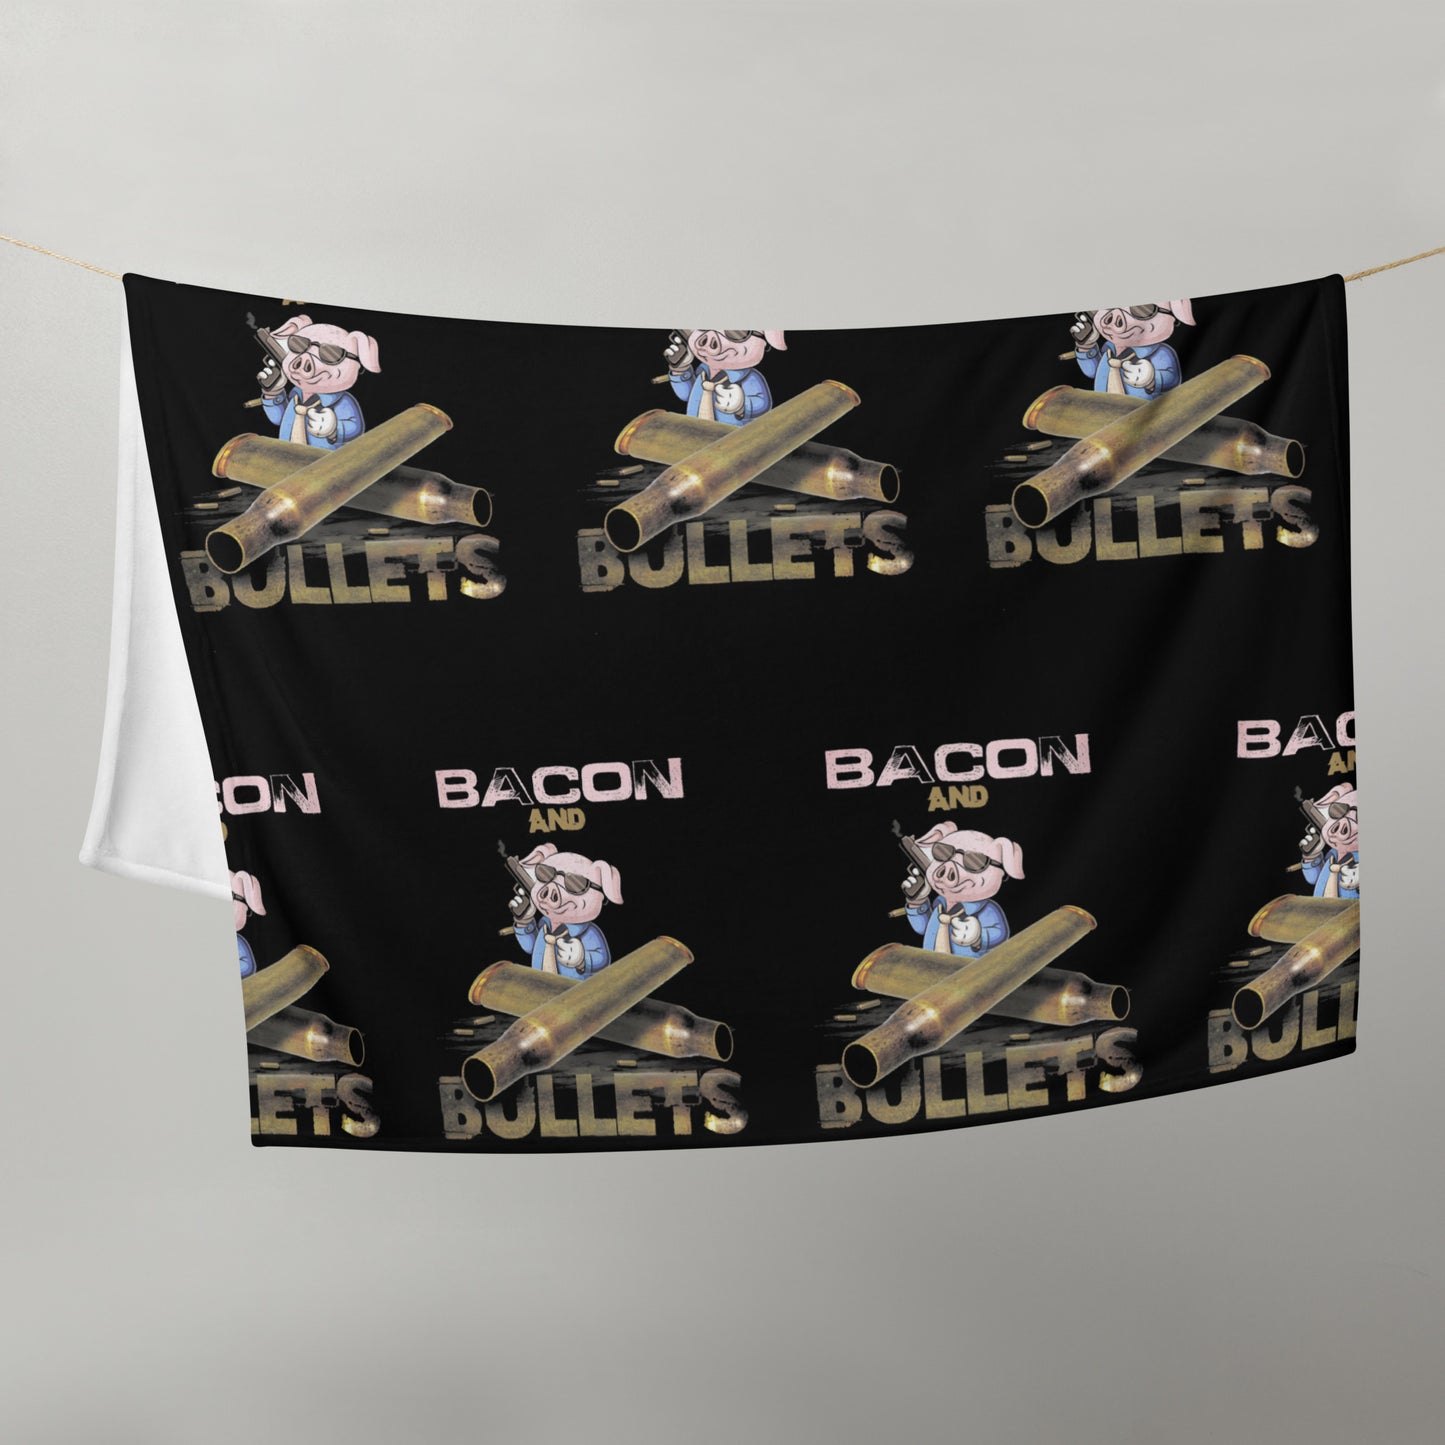 Bacon And Bullets Throw Blanket